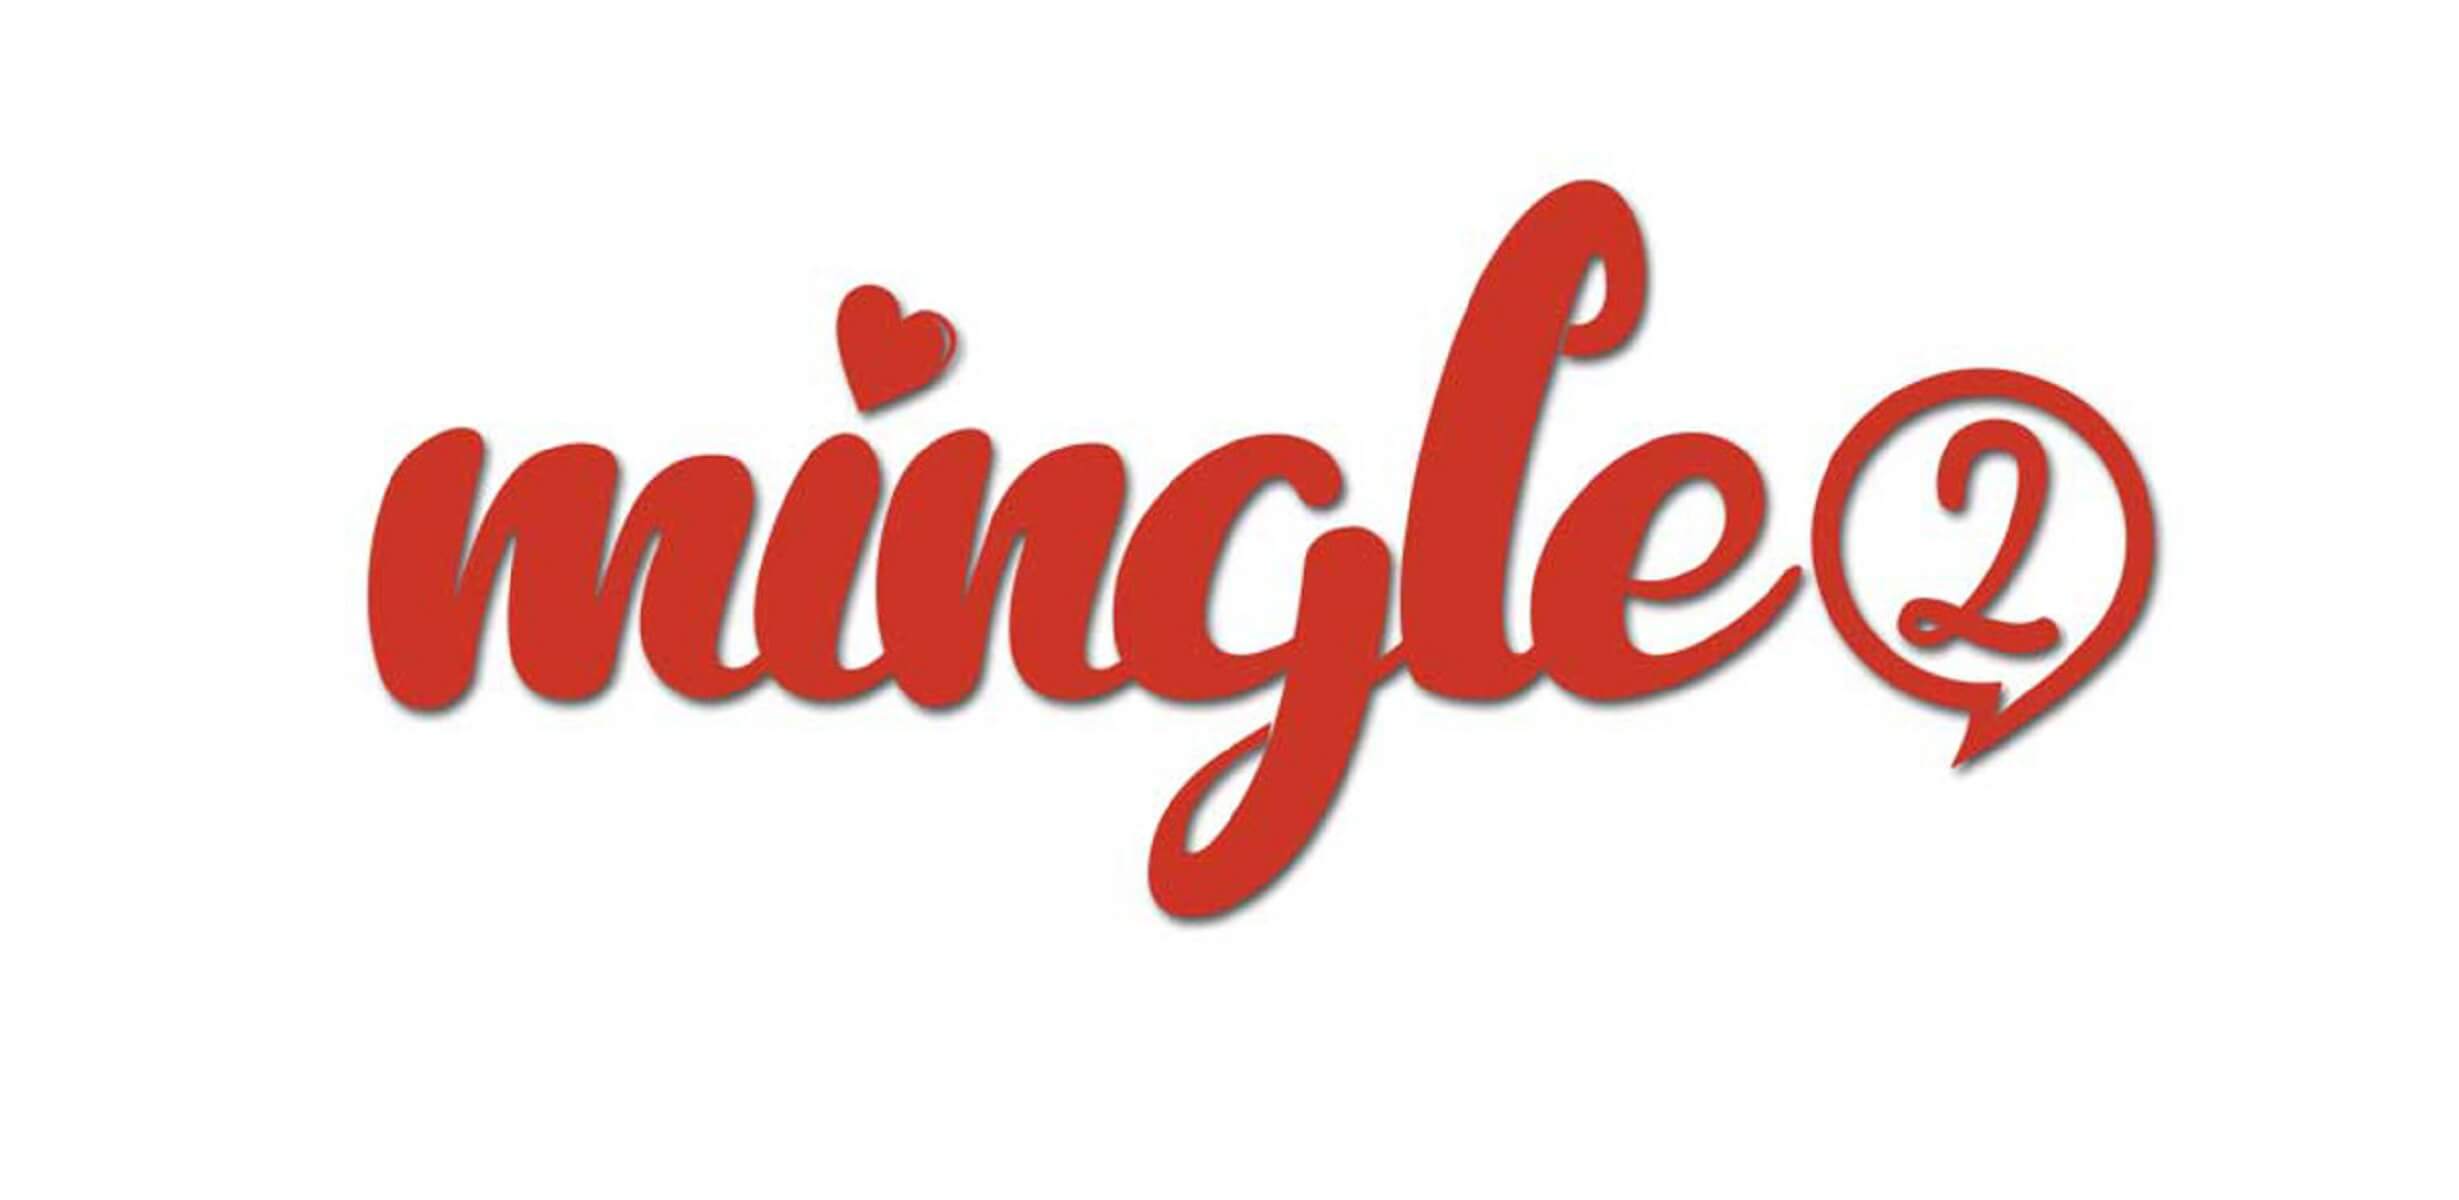 Mingle2 Review September 2021: Too Good to be True? - DatingScout.com